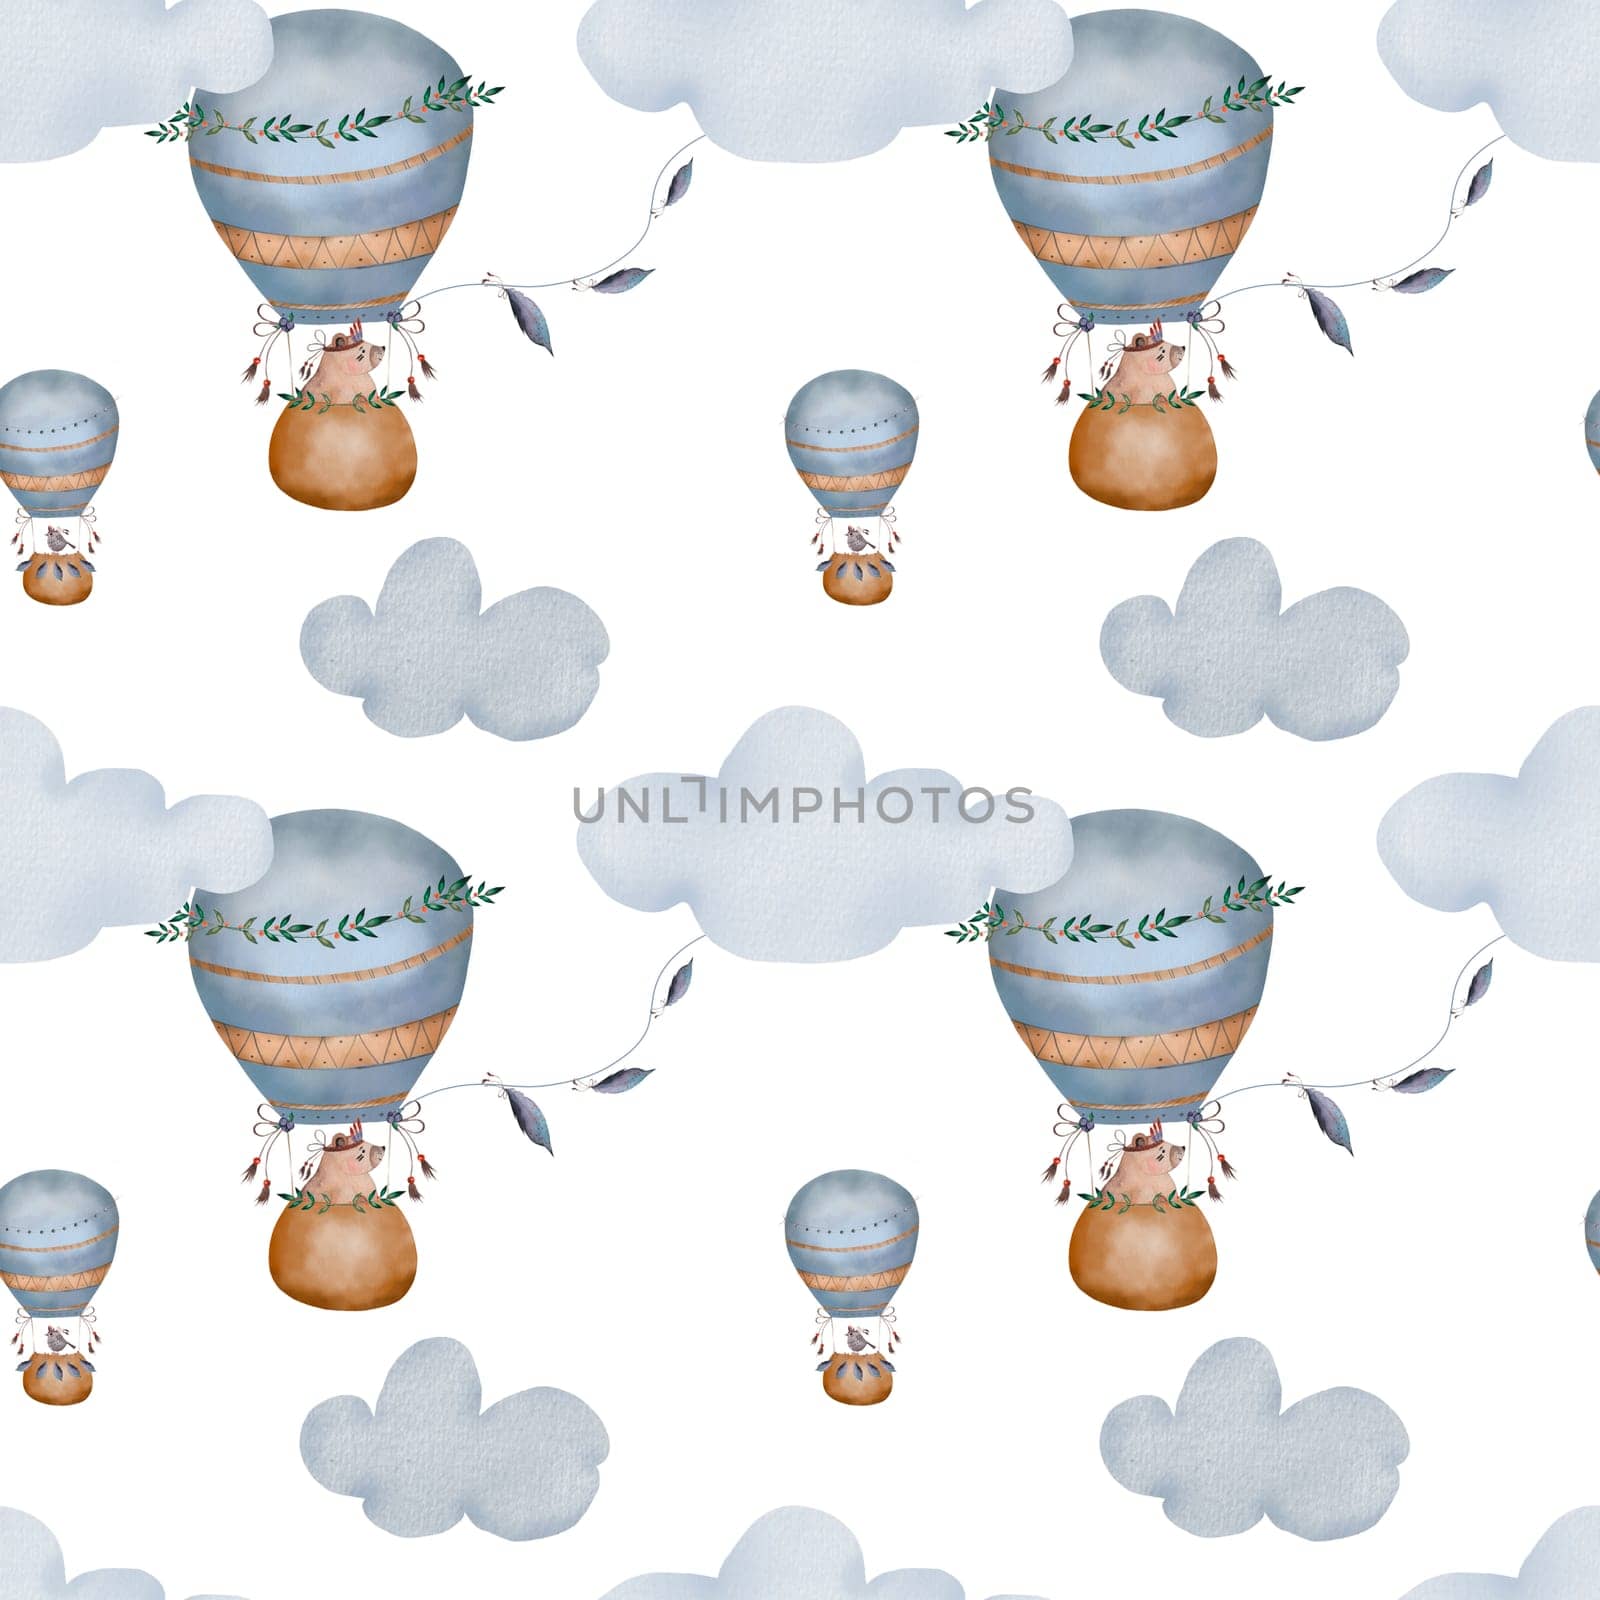 Watercolor pattern baby hot air balloons in pastel colors. Cute illustration of a bird and a bear in boho style with clouds. Kawaii seamless image for printing on children's textiles and children's room design. High quality illustration